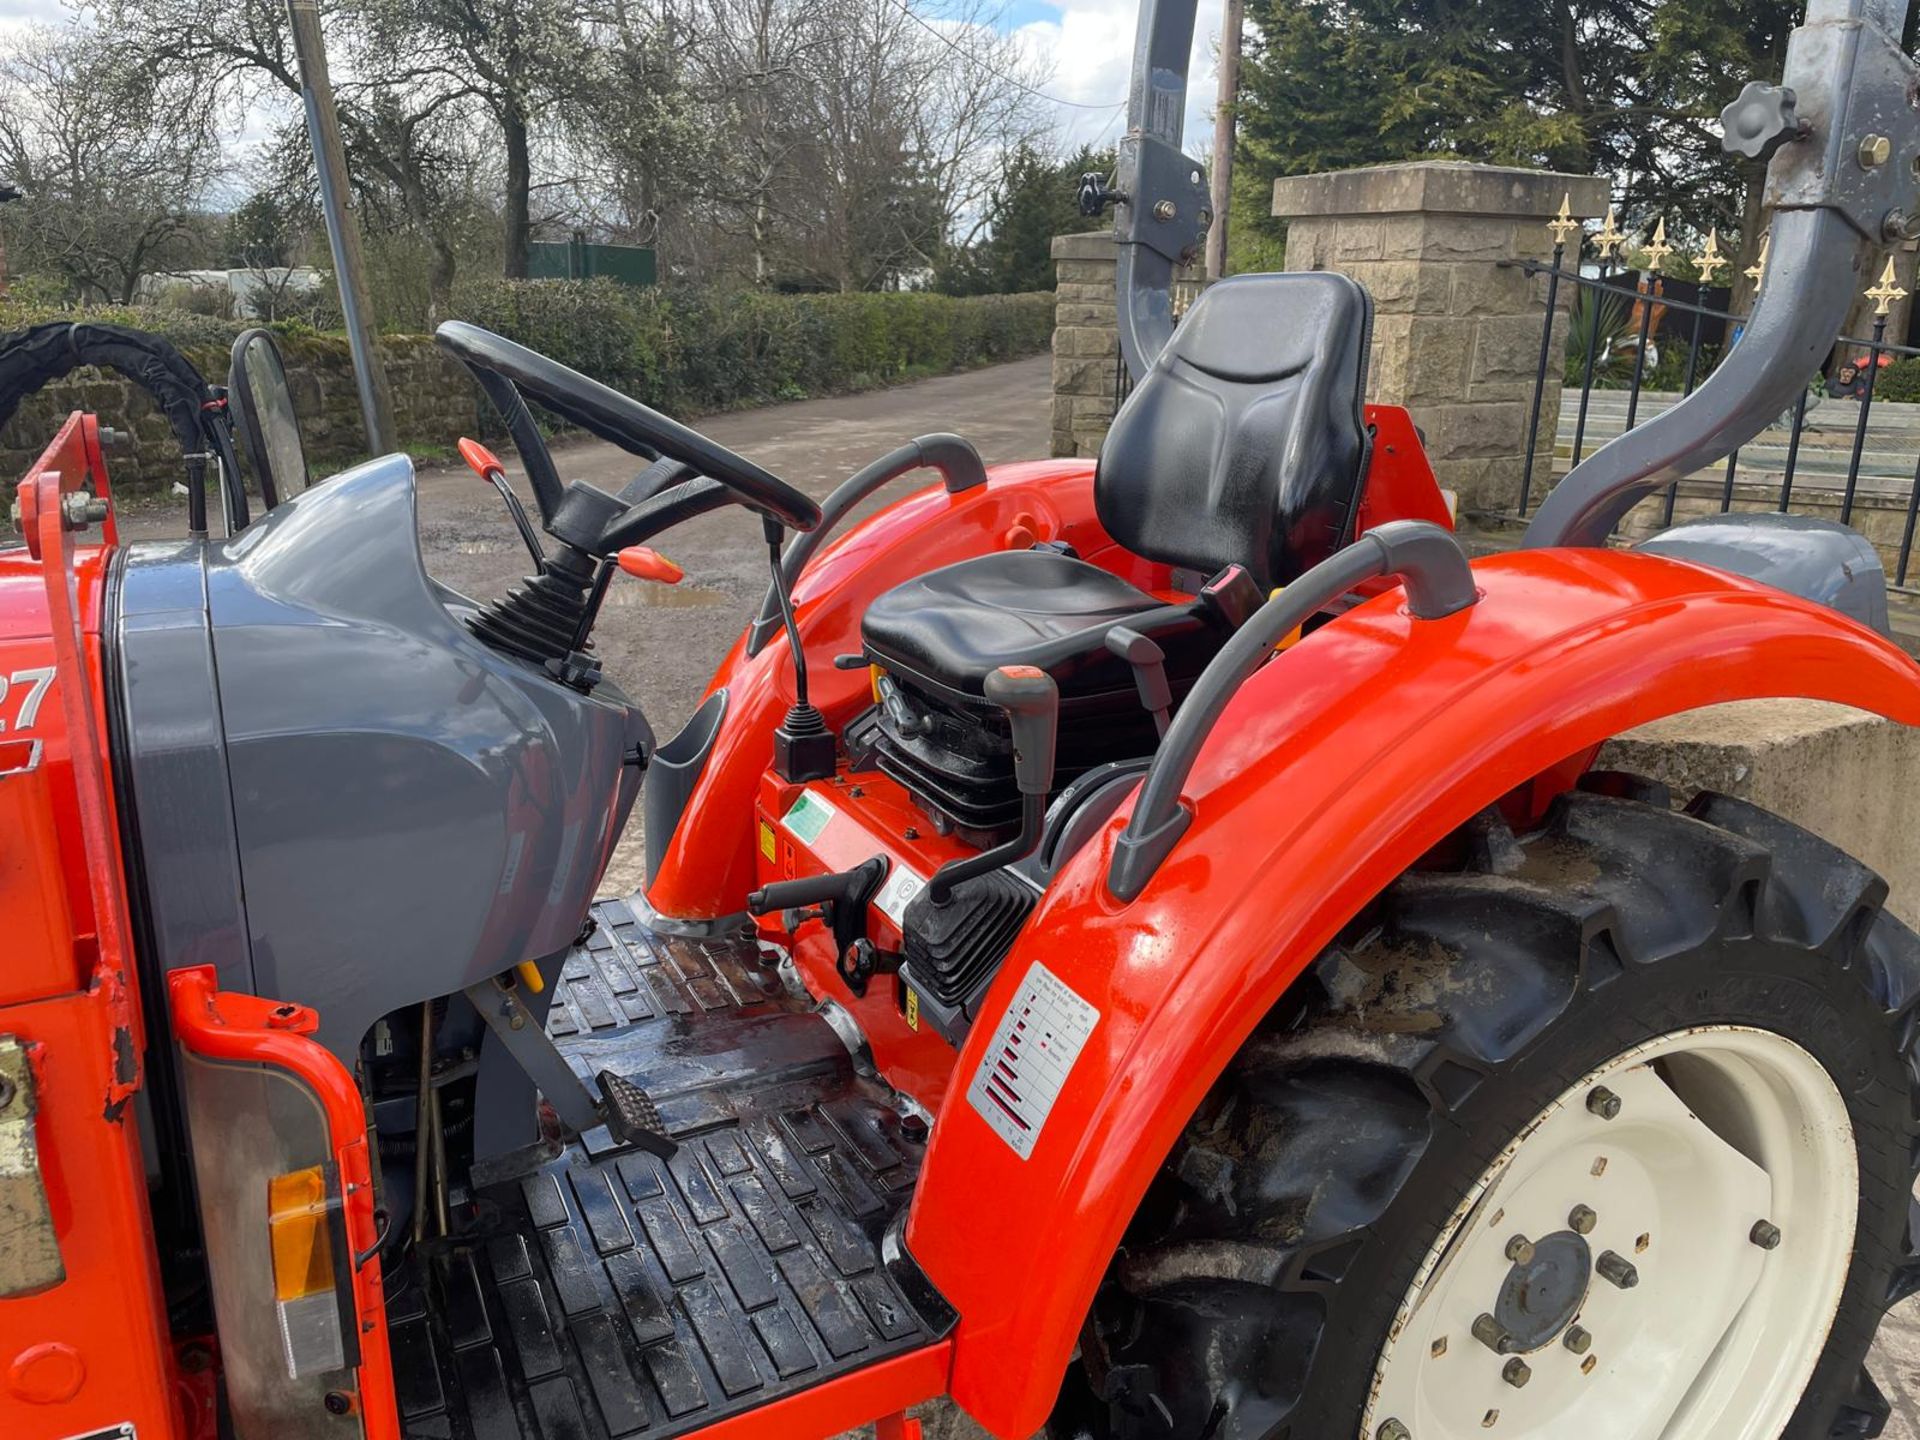 60 REG KIOTI CX27 27HP 4WD COMPACT TRACTOR WITH KIOTI KL130 FRONT LOADER AND PALLET FORKS *PLUS VAT* - Image 11 of 19